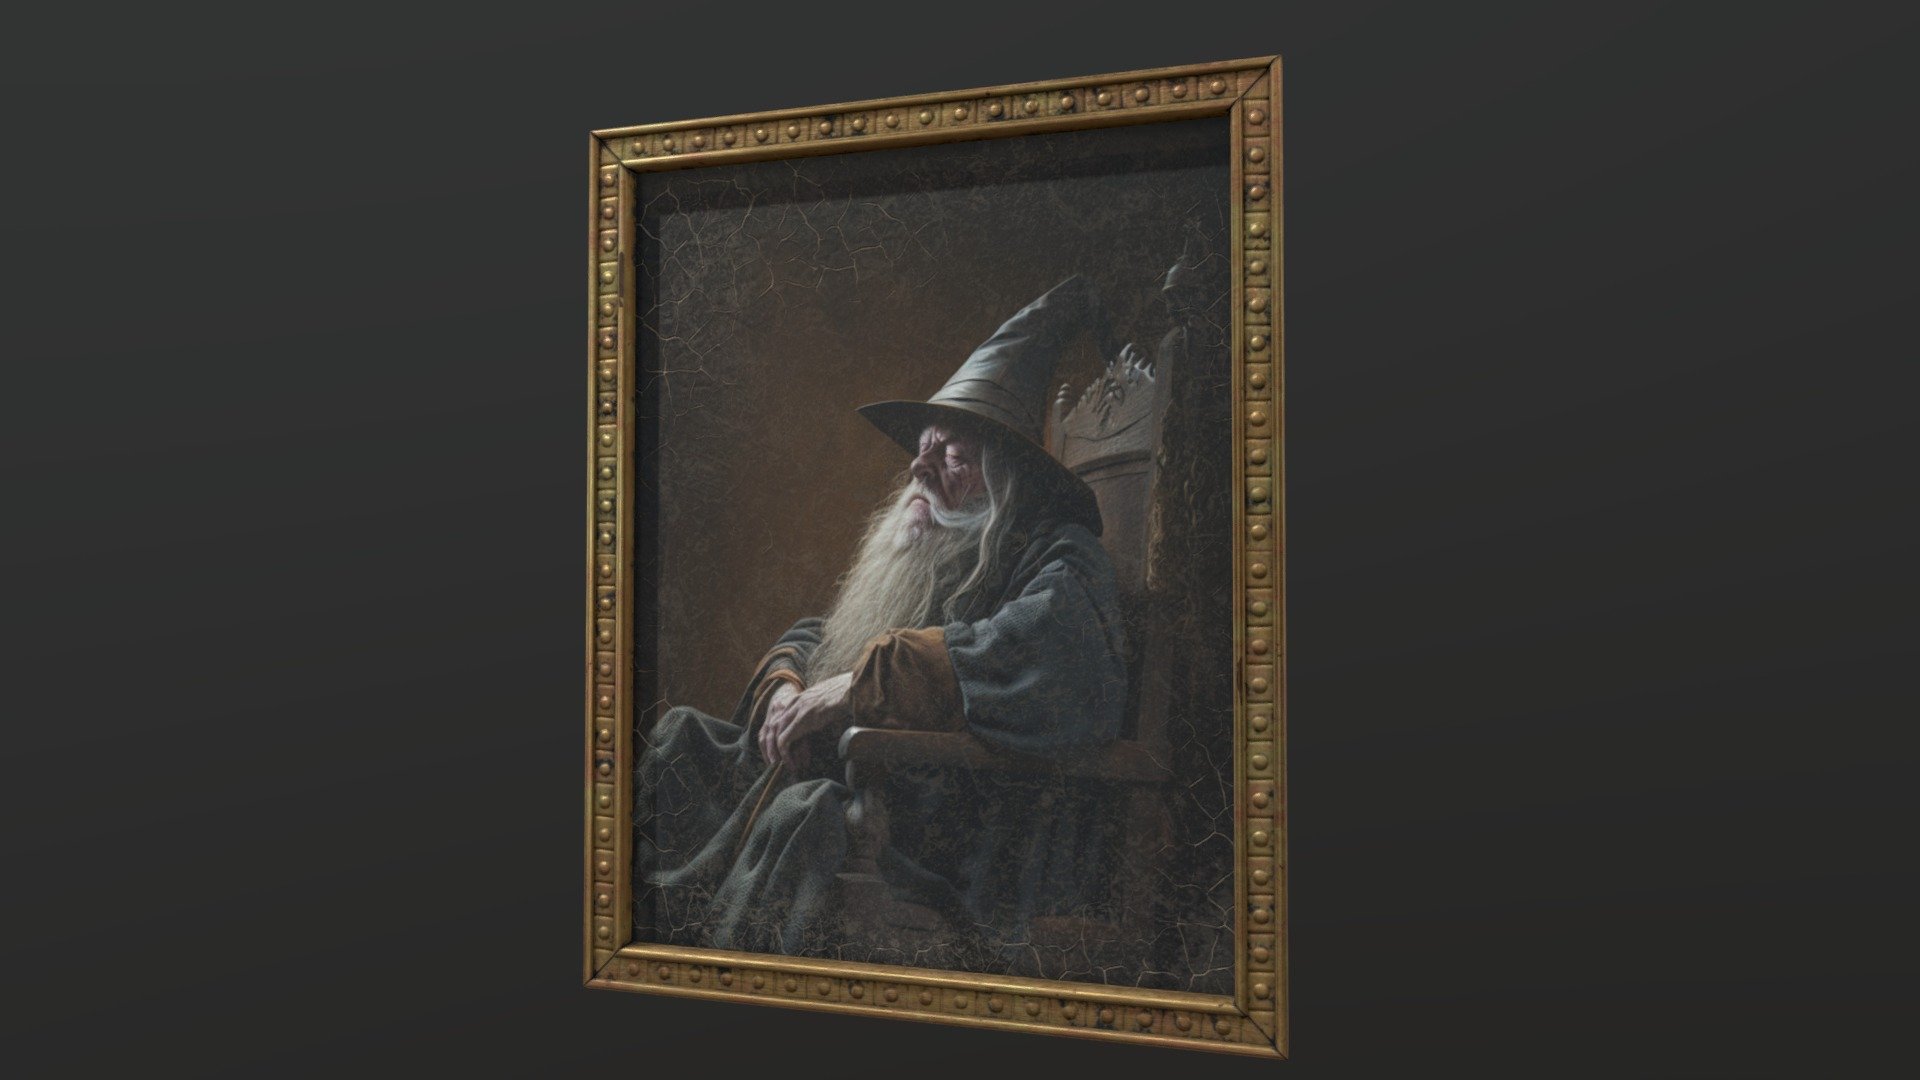 An old oil painting portrait of a wizard sleeping sitting on a chair.

4K maps: Base Color, Normal (DirectX and OpenGL), Roughness, Metallic and Ambient Occlusion.

Formats: .fbx and .obj

The original illustration also included (without any of the weathering effects I applied in the texturing process) 3d model